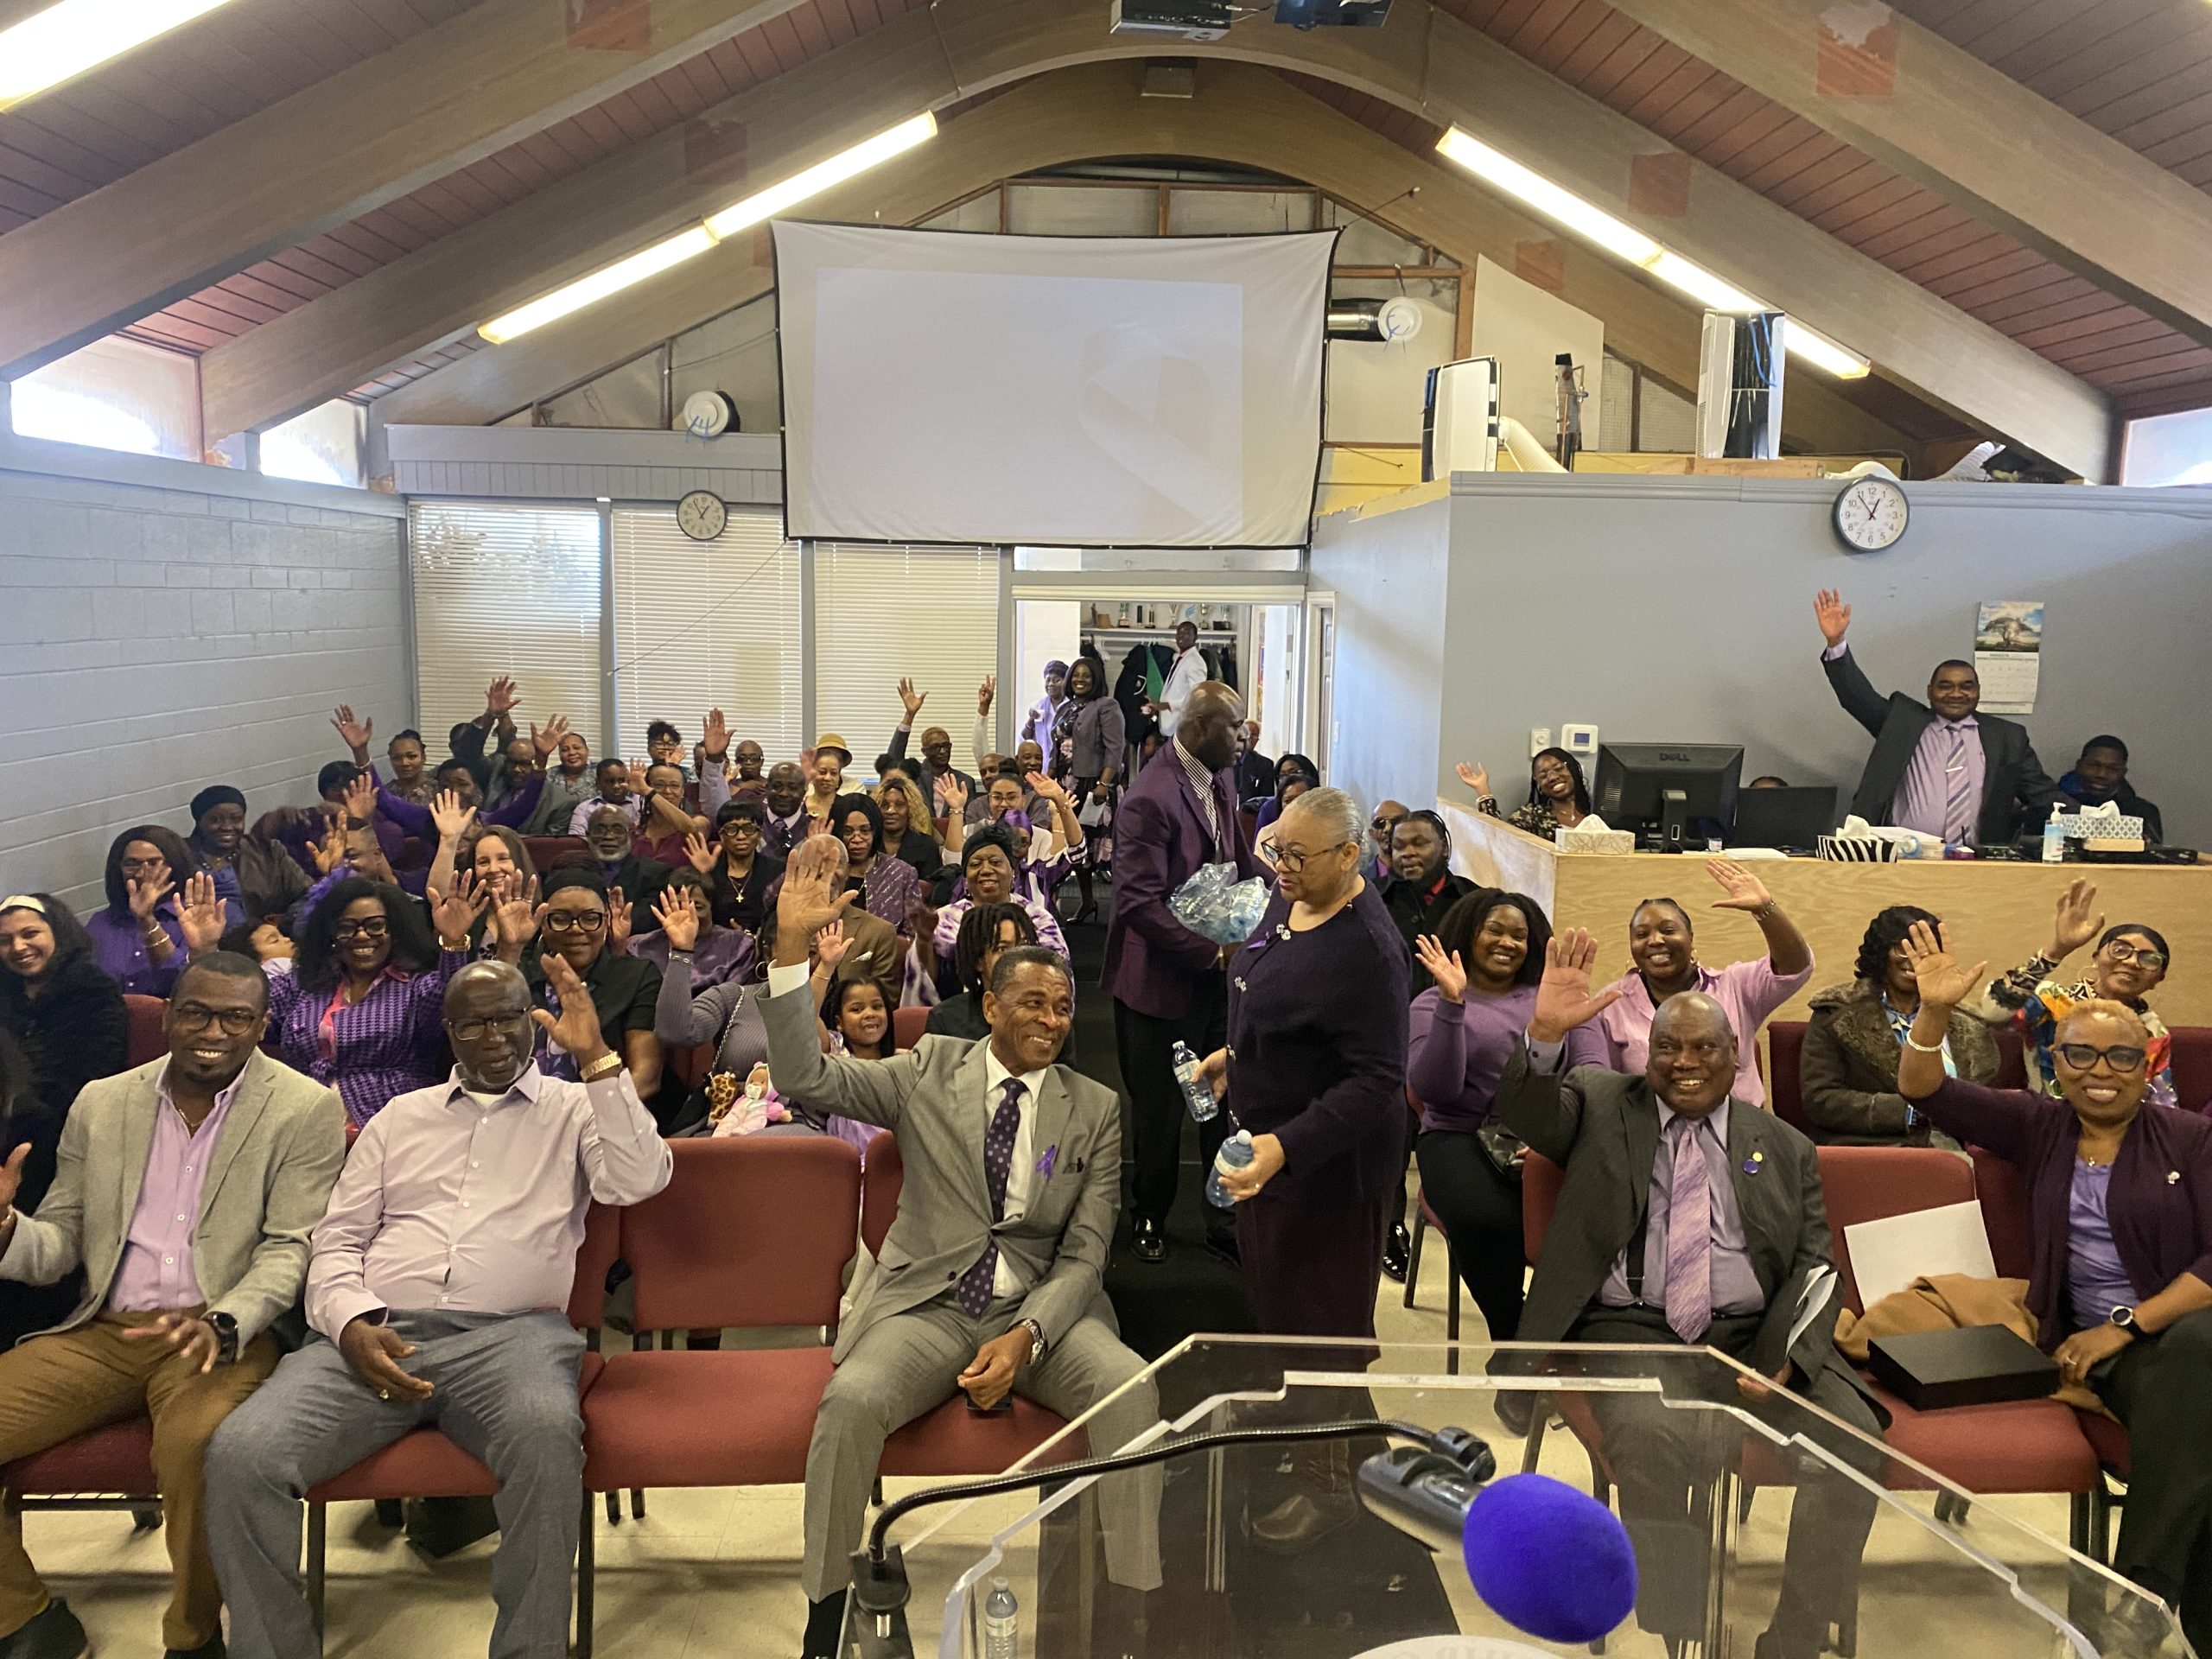 A congregation of people, many wearing purple, smile and wave.